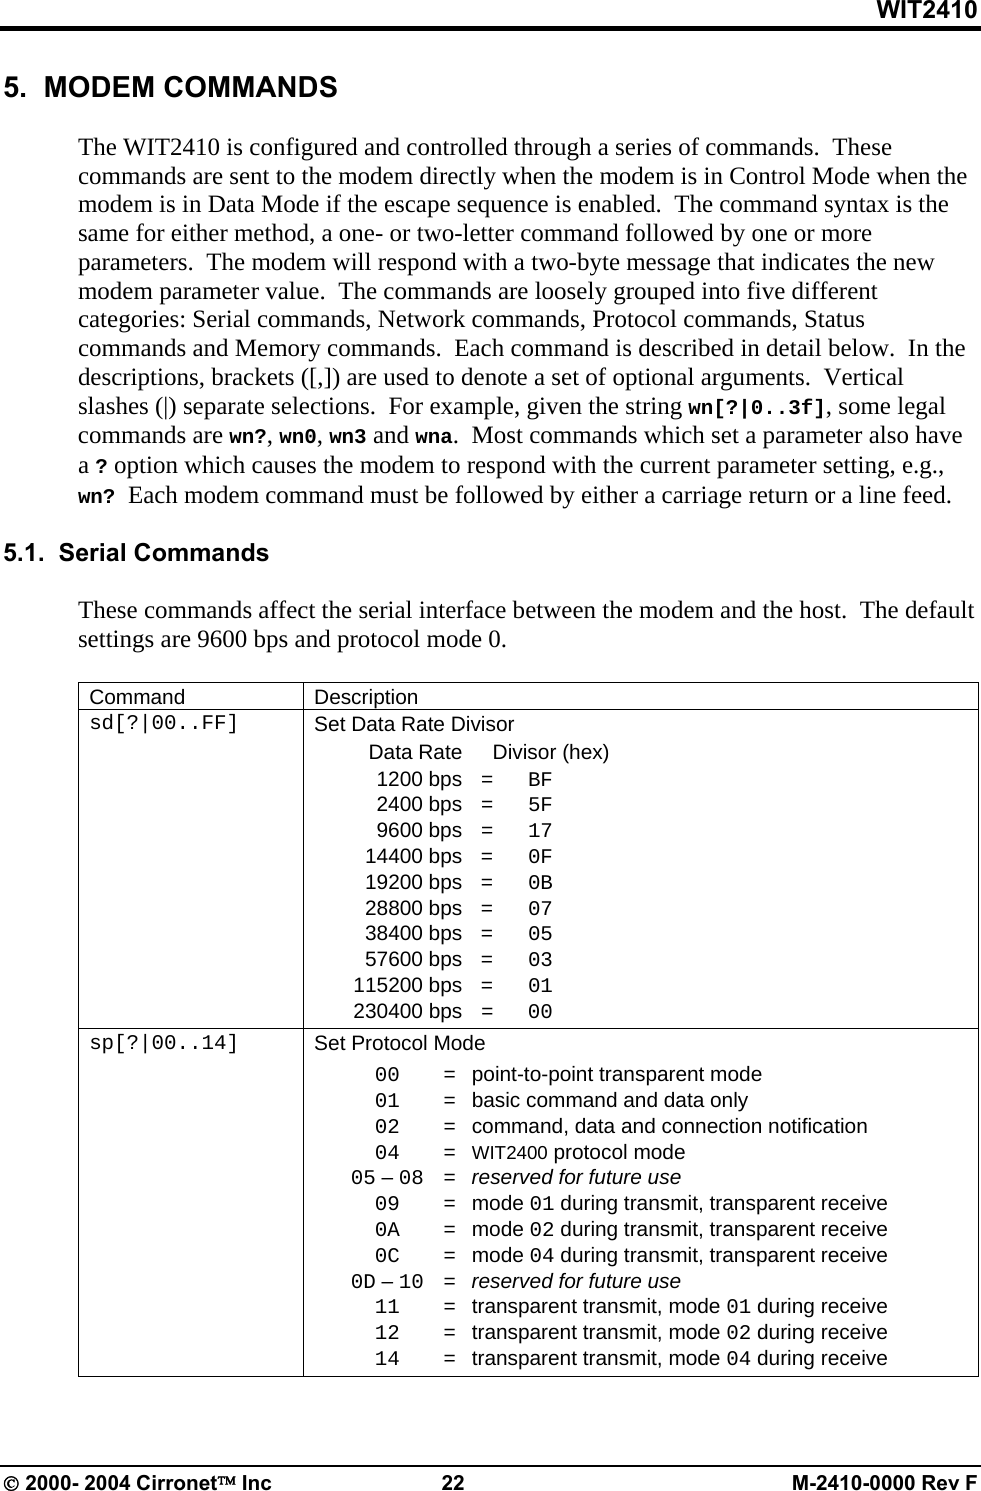 WIT2410 5.  MODEM COMMANDS  The WIT2410 is configured and controlled through a series of commands.  These commands are sent to the modem directly when the modem is in Control Mode when the modem is in Data Mode if the escape sequence is enabled.  The command syntax is the same for either method, a one- or two-letter command followed by one or more parameters.  The modem will respond with a two-byte message that indicates the new modem parameter value.  The commands are loosely grouped into five different categories: Serial commands, Network commands, Protocol commands, Status commands and Memory commands.  Each command is described in detail below.  In the descriptions, brackets ([,]) are used to denote a set of optional arguments.  Vertical slashes (|) separate selections.  For example, given the string wn[?|0..3f], some legal commands are wn?, wn0, wn3 and wna.  Most commands which set a parameter also have a ? option which causes the modem to respond with the current parameter setting, e.g., wn? Each modem command must be followed by either a carriage return or a line feed.  5.1.  Serial Commands  These commands affect the serial interface between the modem and the host.  The default settings are 9600 bps and protocol mode 0.  Command Description sd[?|00..FF]  Set Data Rate Divisor   Data Rate    Divisor (hex)  1200 bps = BF  2400 bps = 5F  9600 bps = 17  14400 bps = 0F  19200 bps = 0B  28800 bps = 07  38400 bps = 05  57600 bps = 03  115200 bps = 01  230400 bps =  00 sp[?|00..14]  Set Protocol Mode  00   =  point-to-point transparent mode  01   =  basic command and data only  02   =  command, data and connection notification  04   =  WIT2400 protocol mode  05 – 08   =  reserved for future use  09   =  mode 01 during transmit, transparent receive  0A   =  mode 02 during transmit, transparent receive  0C   =  mode 04 during transmit, transparent receive  0D – 10   =  reserved for future use  11   =  transparent transmit, mode 01 during receive  12   =  transparent transmit, mode 02 during receive  14   =  transparent transmit, mode 04 during receive  © 2000- 2004 Cirronet™ Inc  22  M-2410-0000 Rev F 